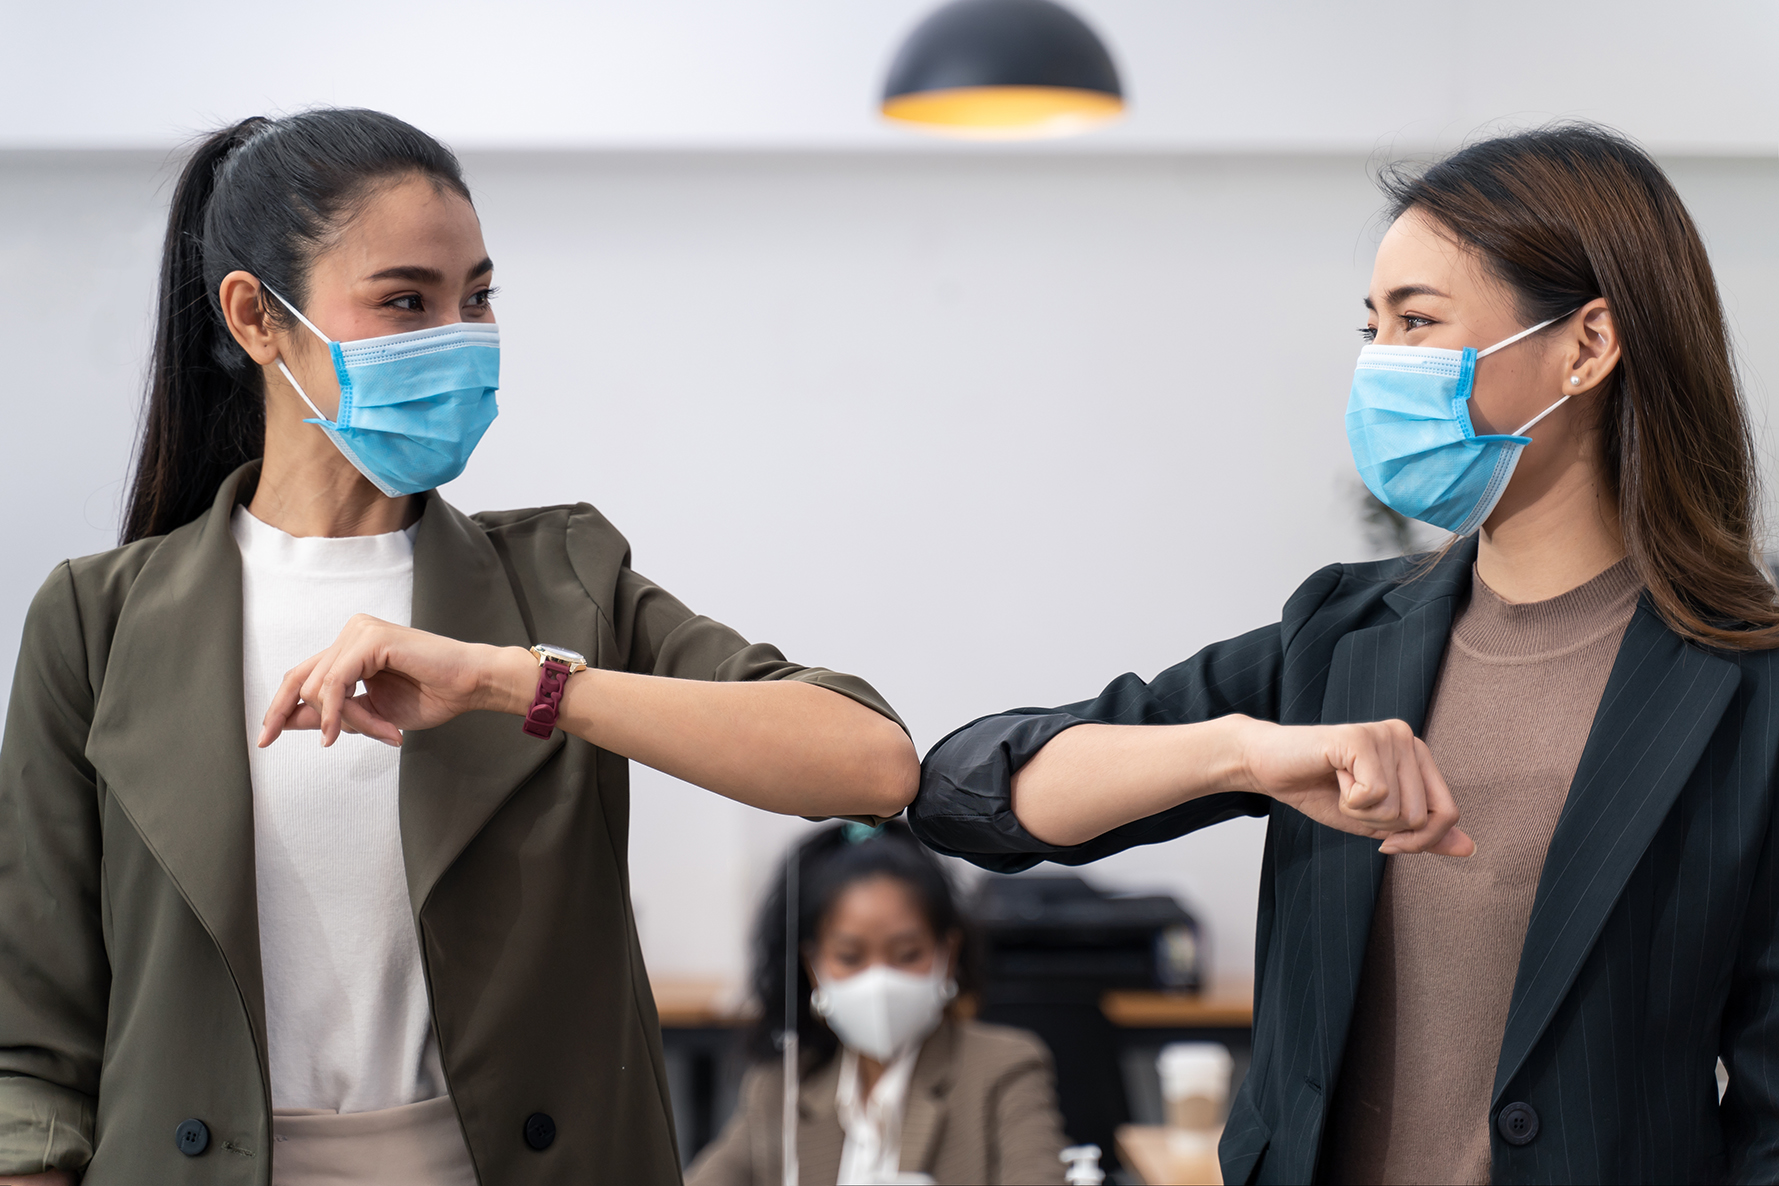 Allied health assistants bump elbows and wear masks during coronavirus restrictions